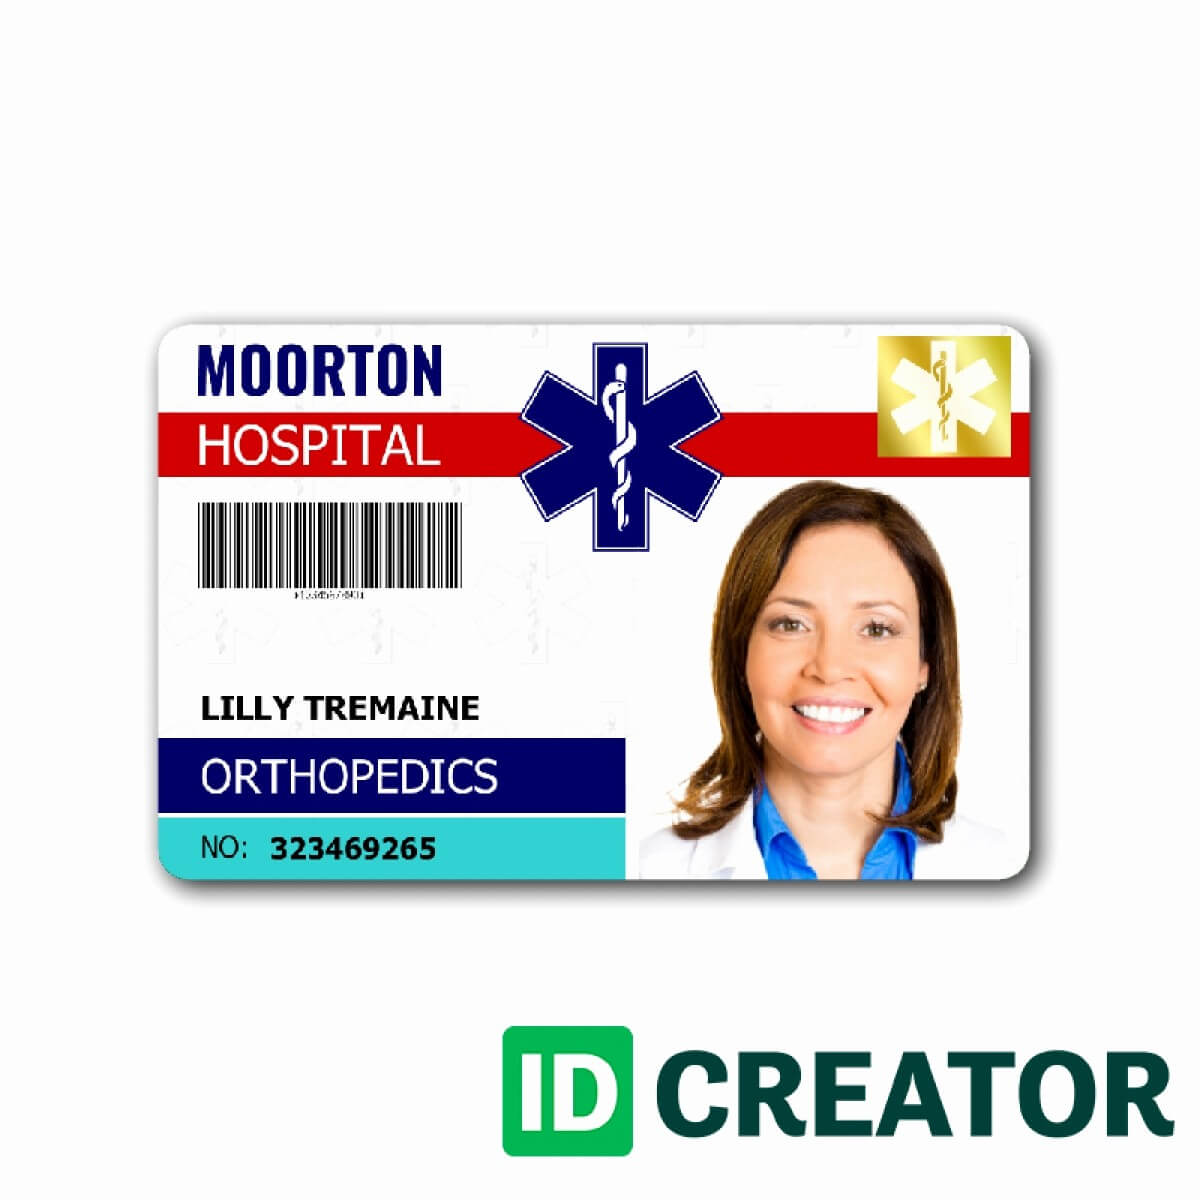 002 Template Ideas Id Badge Free Online Awesome Beepmunk Within Doctor Id Card Template